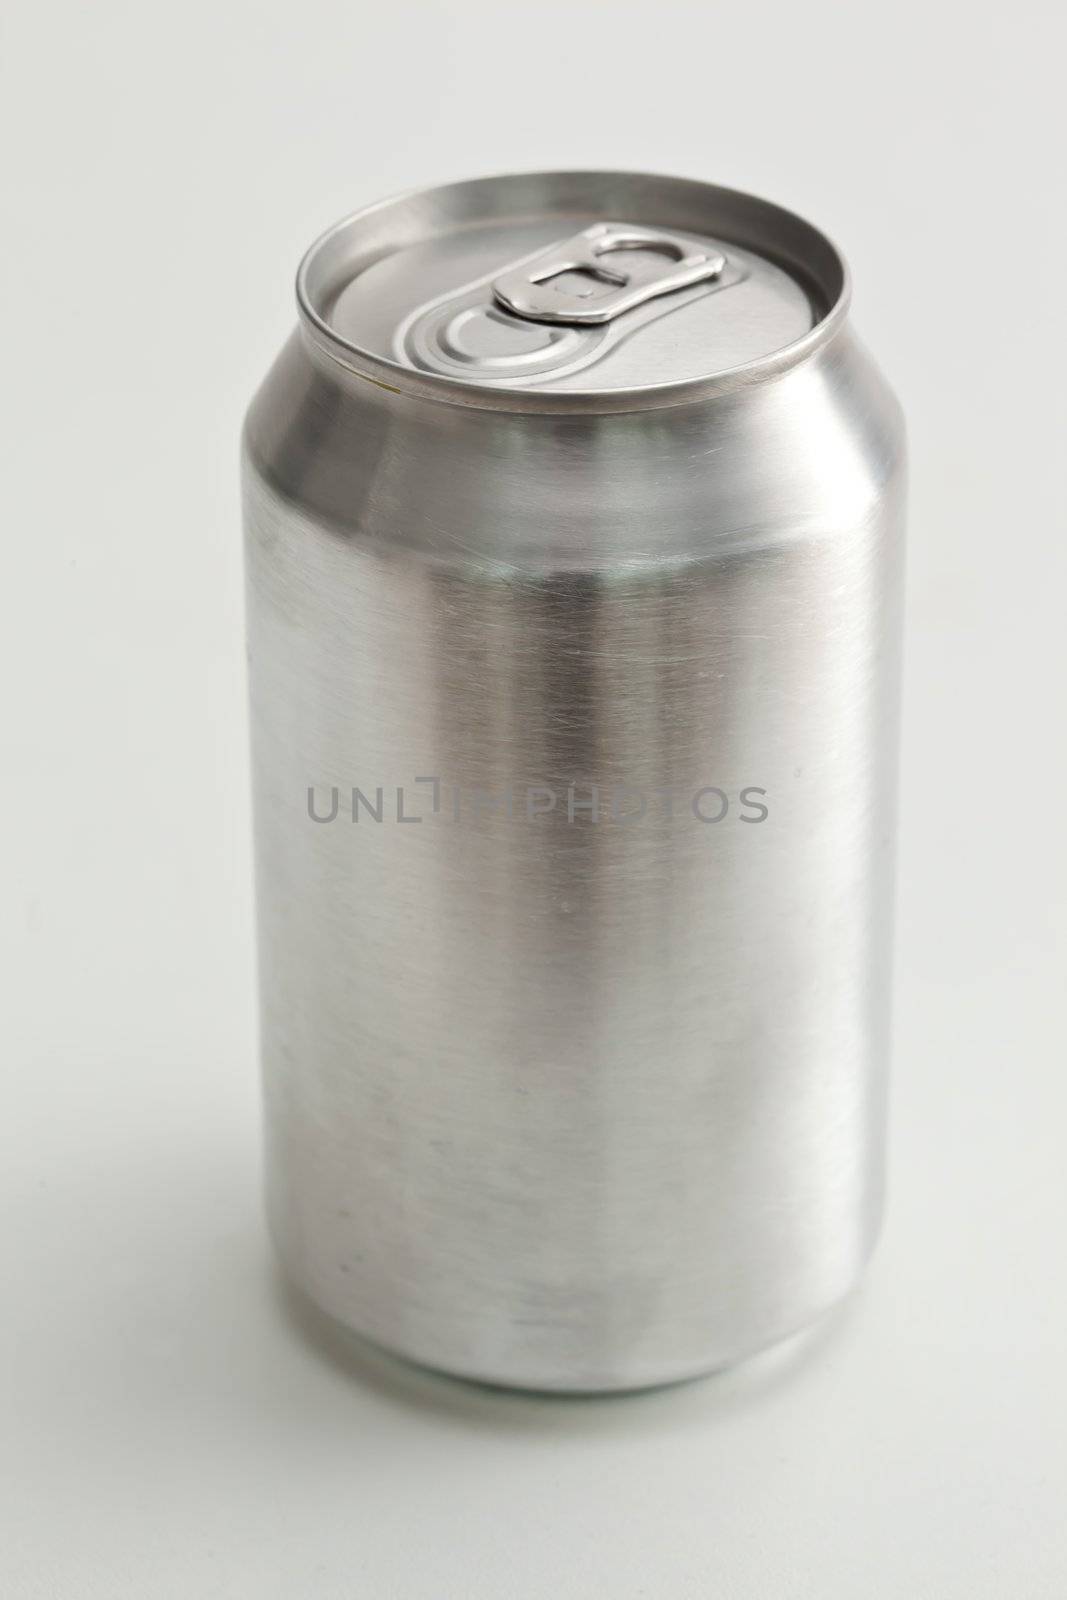 Aluminium closed can against a white background